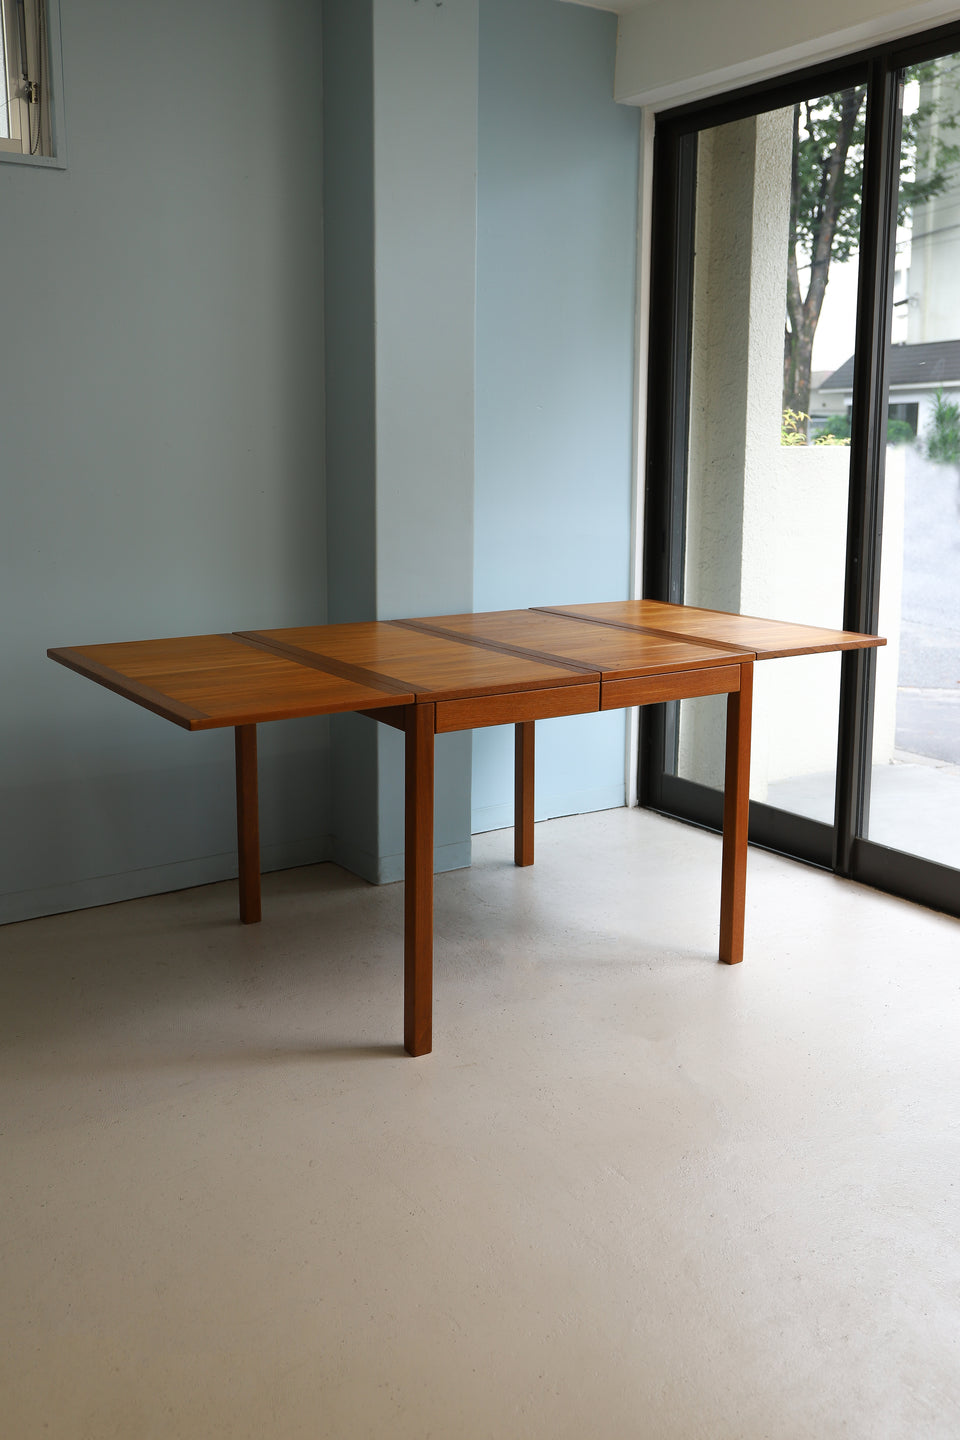 Vejle Stole & Møbelfabrik Extension Dining Table Danish Vintage/デンマークヴィンテージ エクステンション ダイニングテーブル 北欧家具